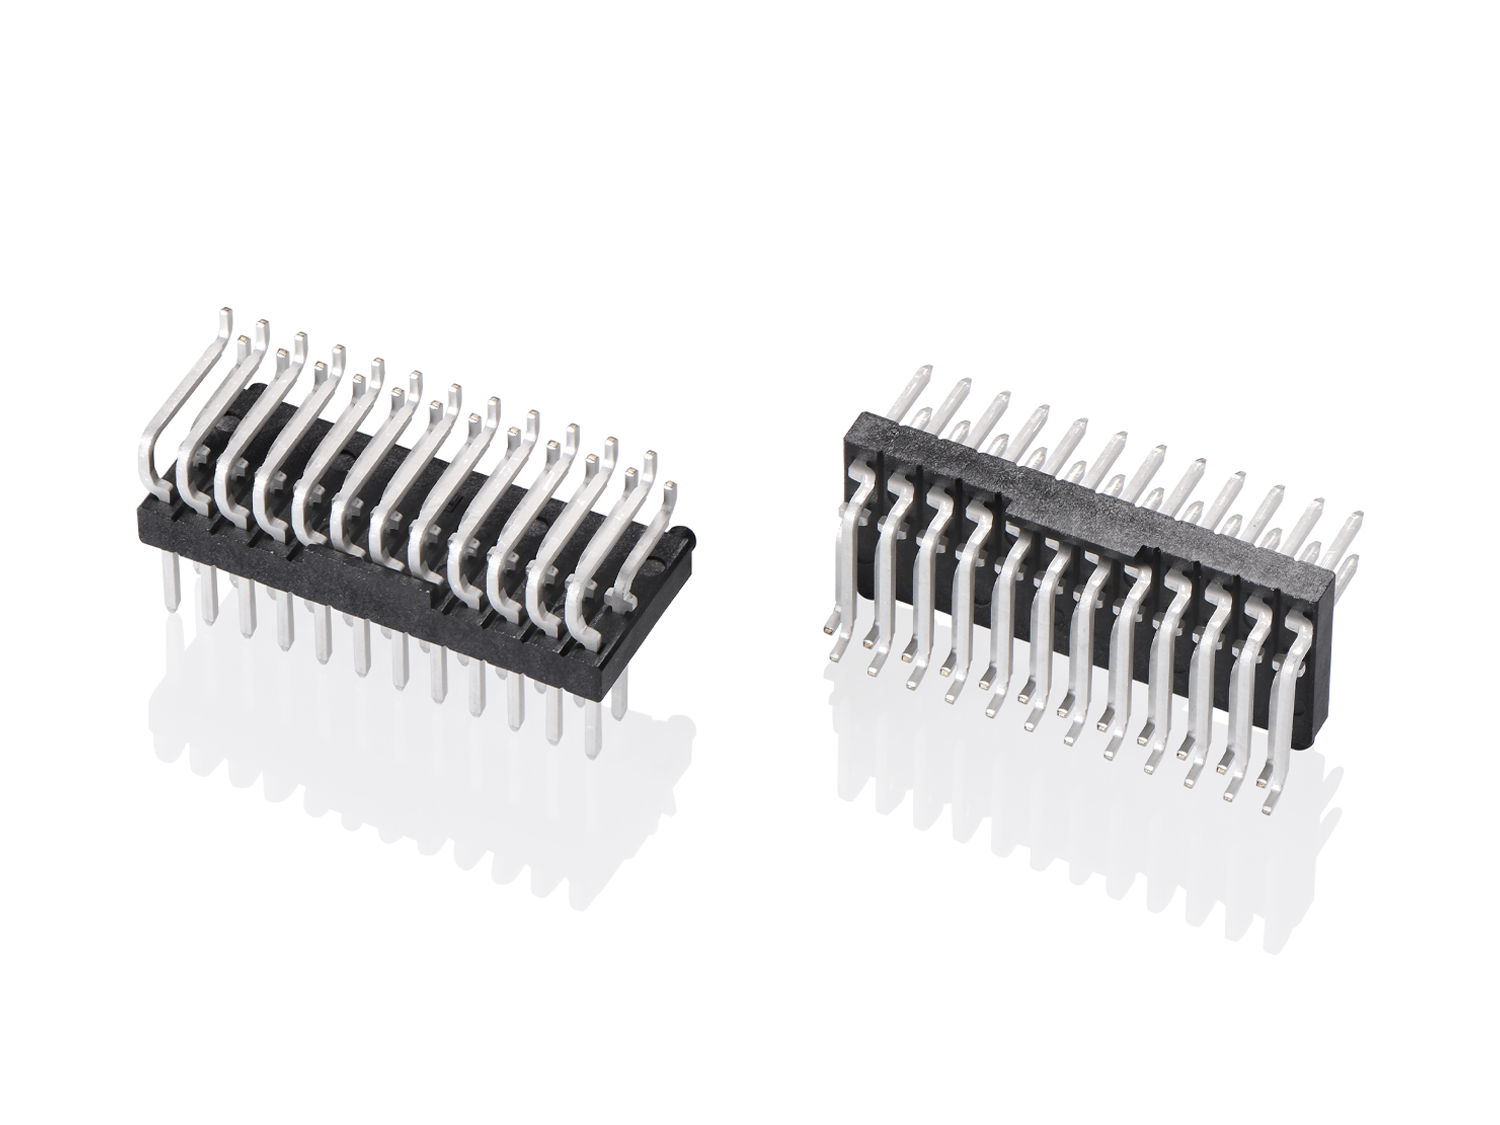 2202  Series 2.20mm Pitch (.087) Pin Header Connectors